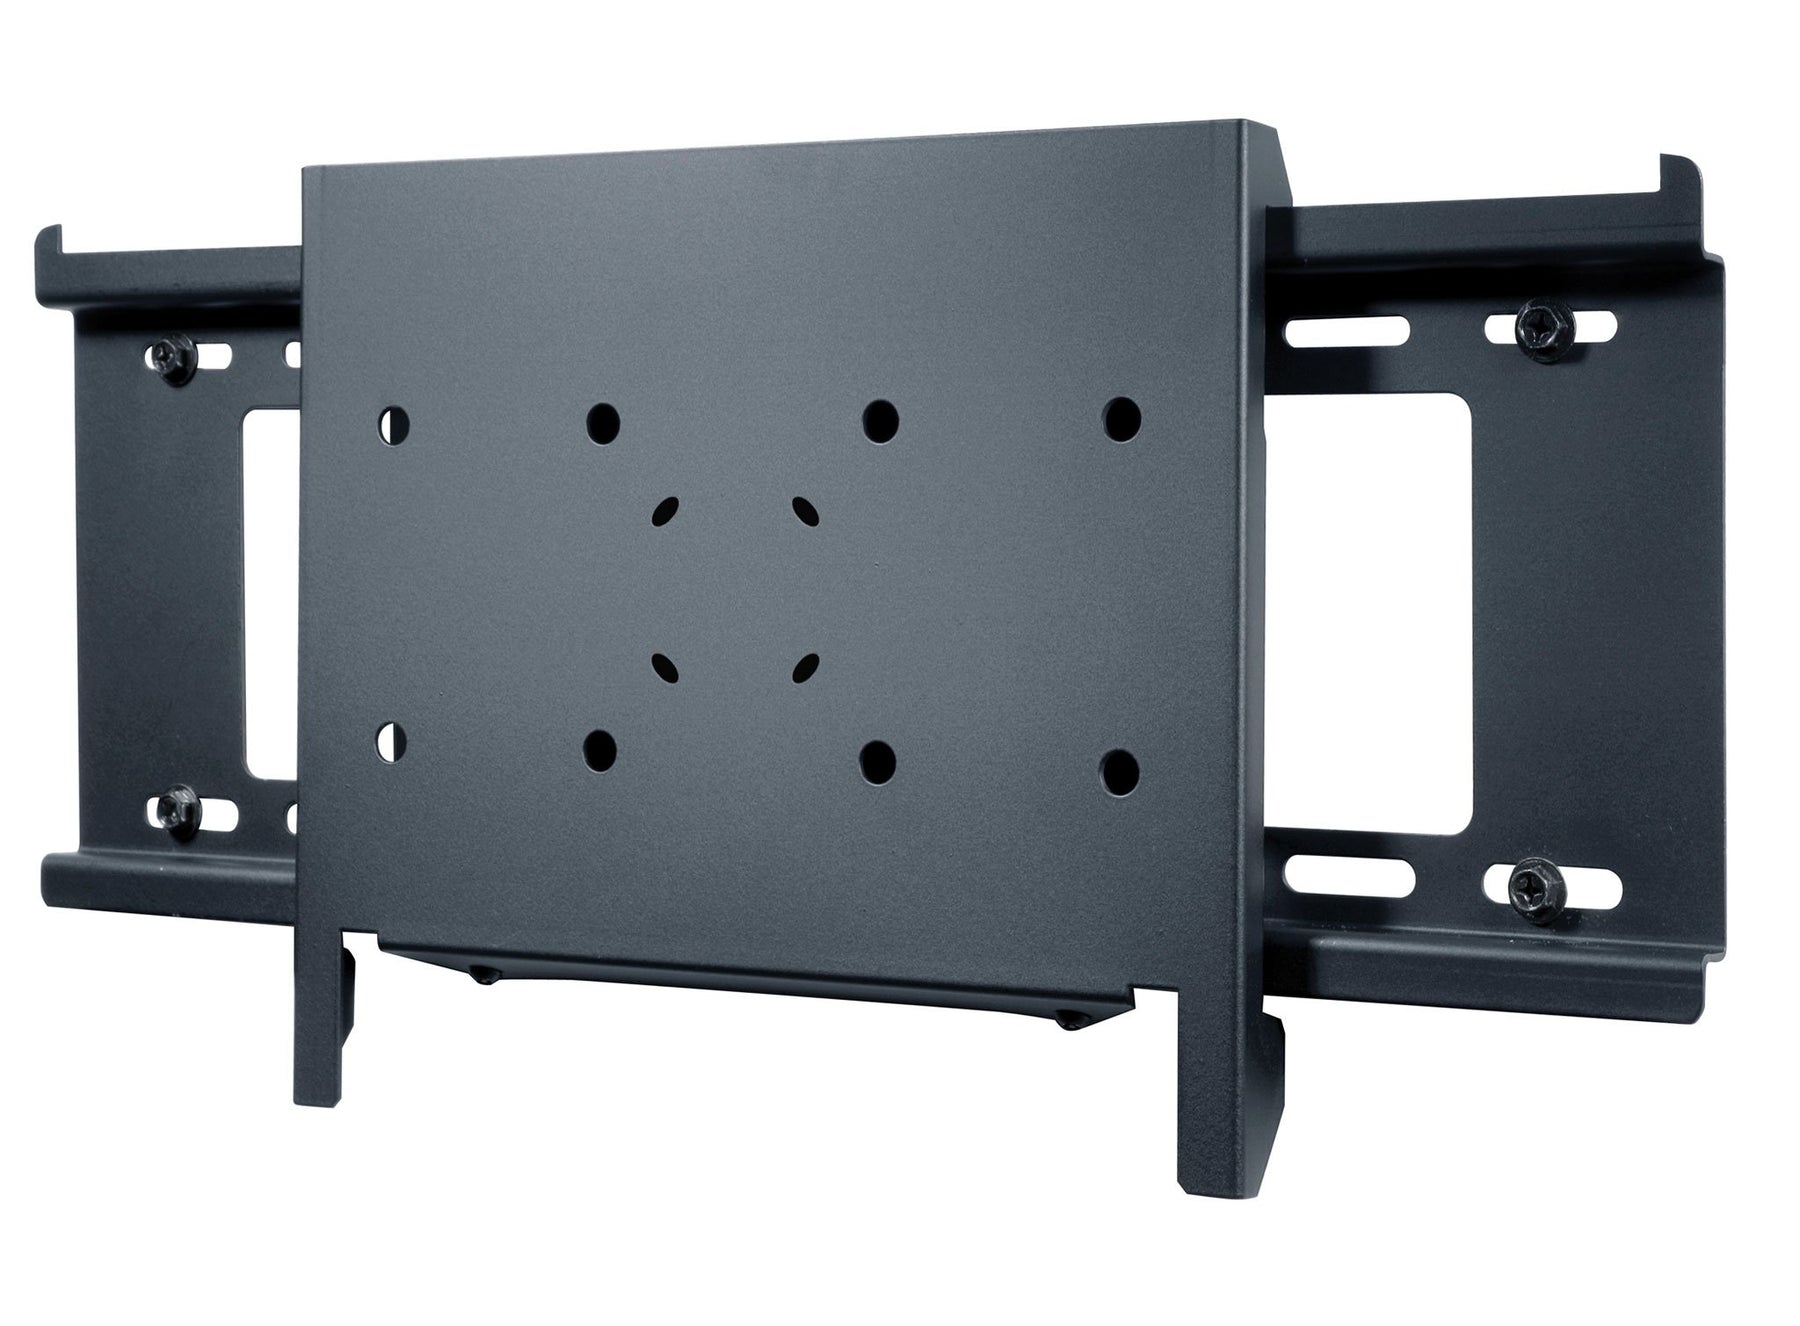 Peerless SmartMount Dedicated Flat Wall Mount SF16D - Mounting Kit (wall plate, fasteners, bracket, adapter plate) - for flat panel - black - screen size: 22" - 71" - wall mountable